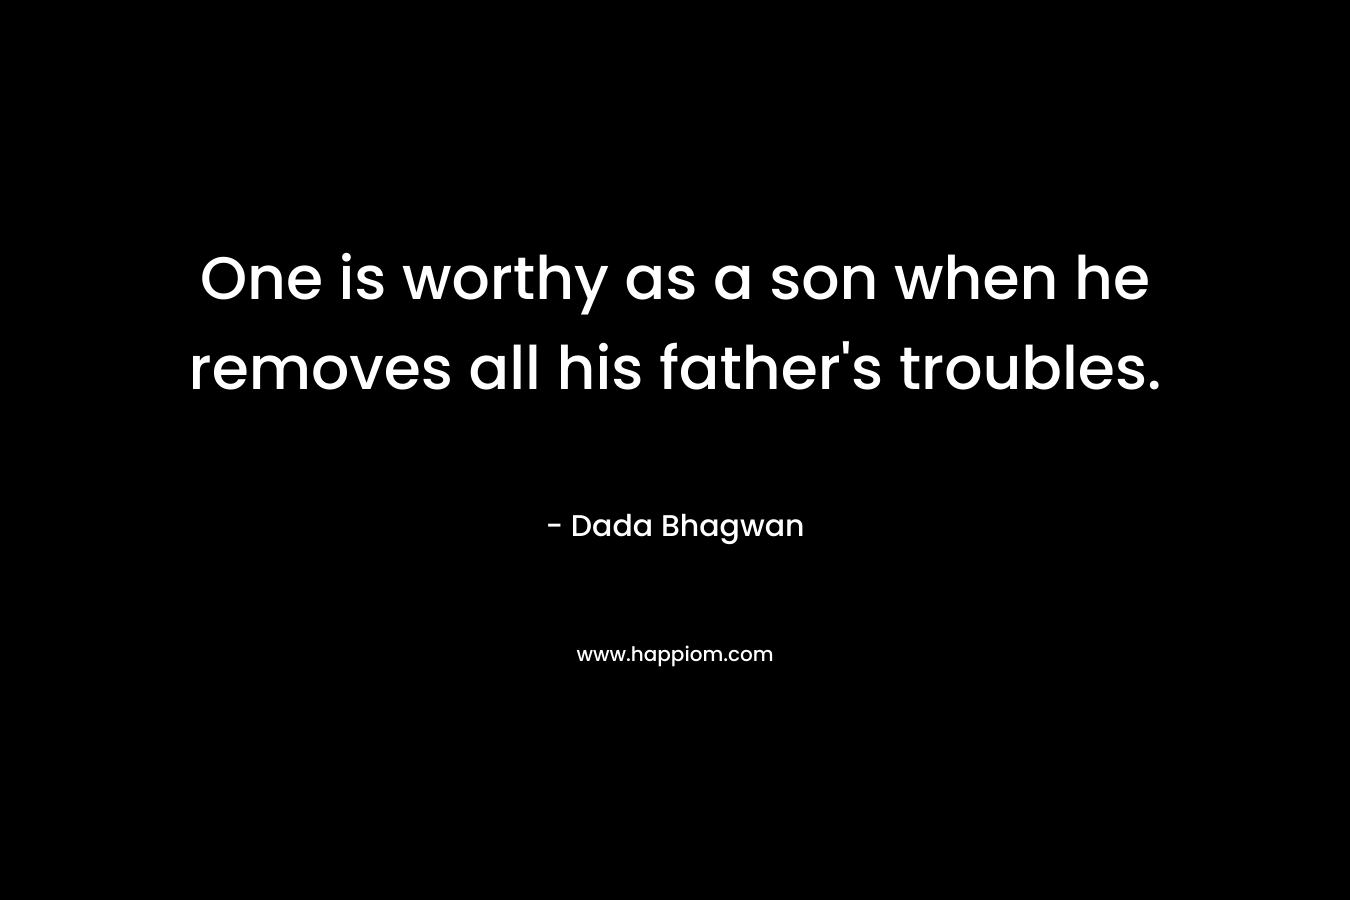 One is worthy as a son when he removes all his father's troubles.